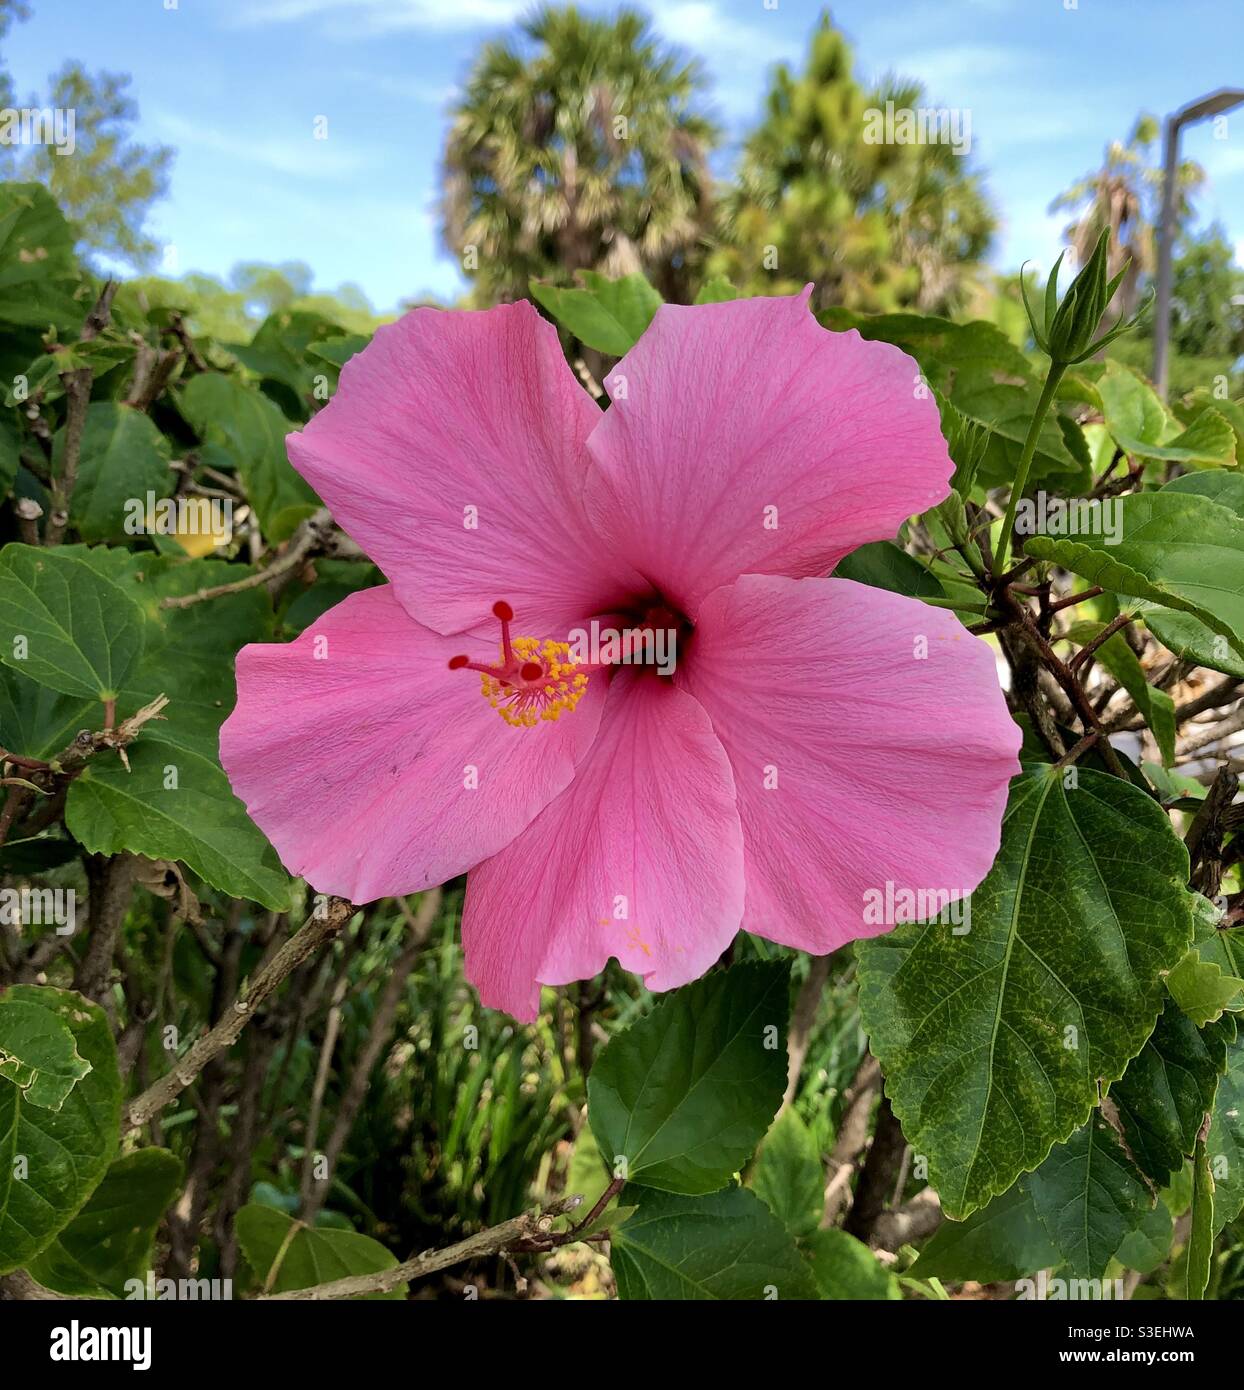 Large pink hibiscus flower from the mallow family Malvaceae. Stock Photo